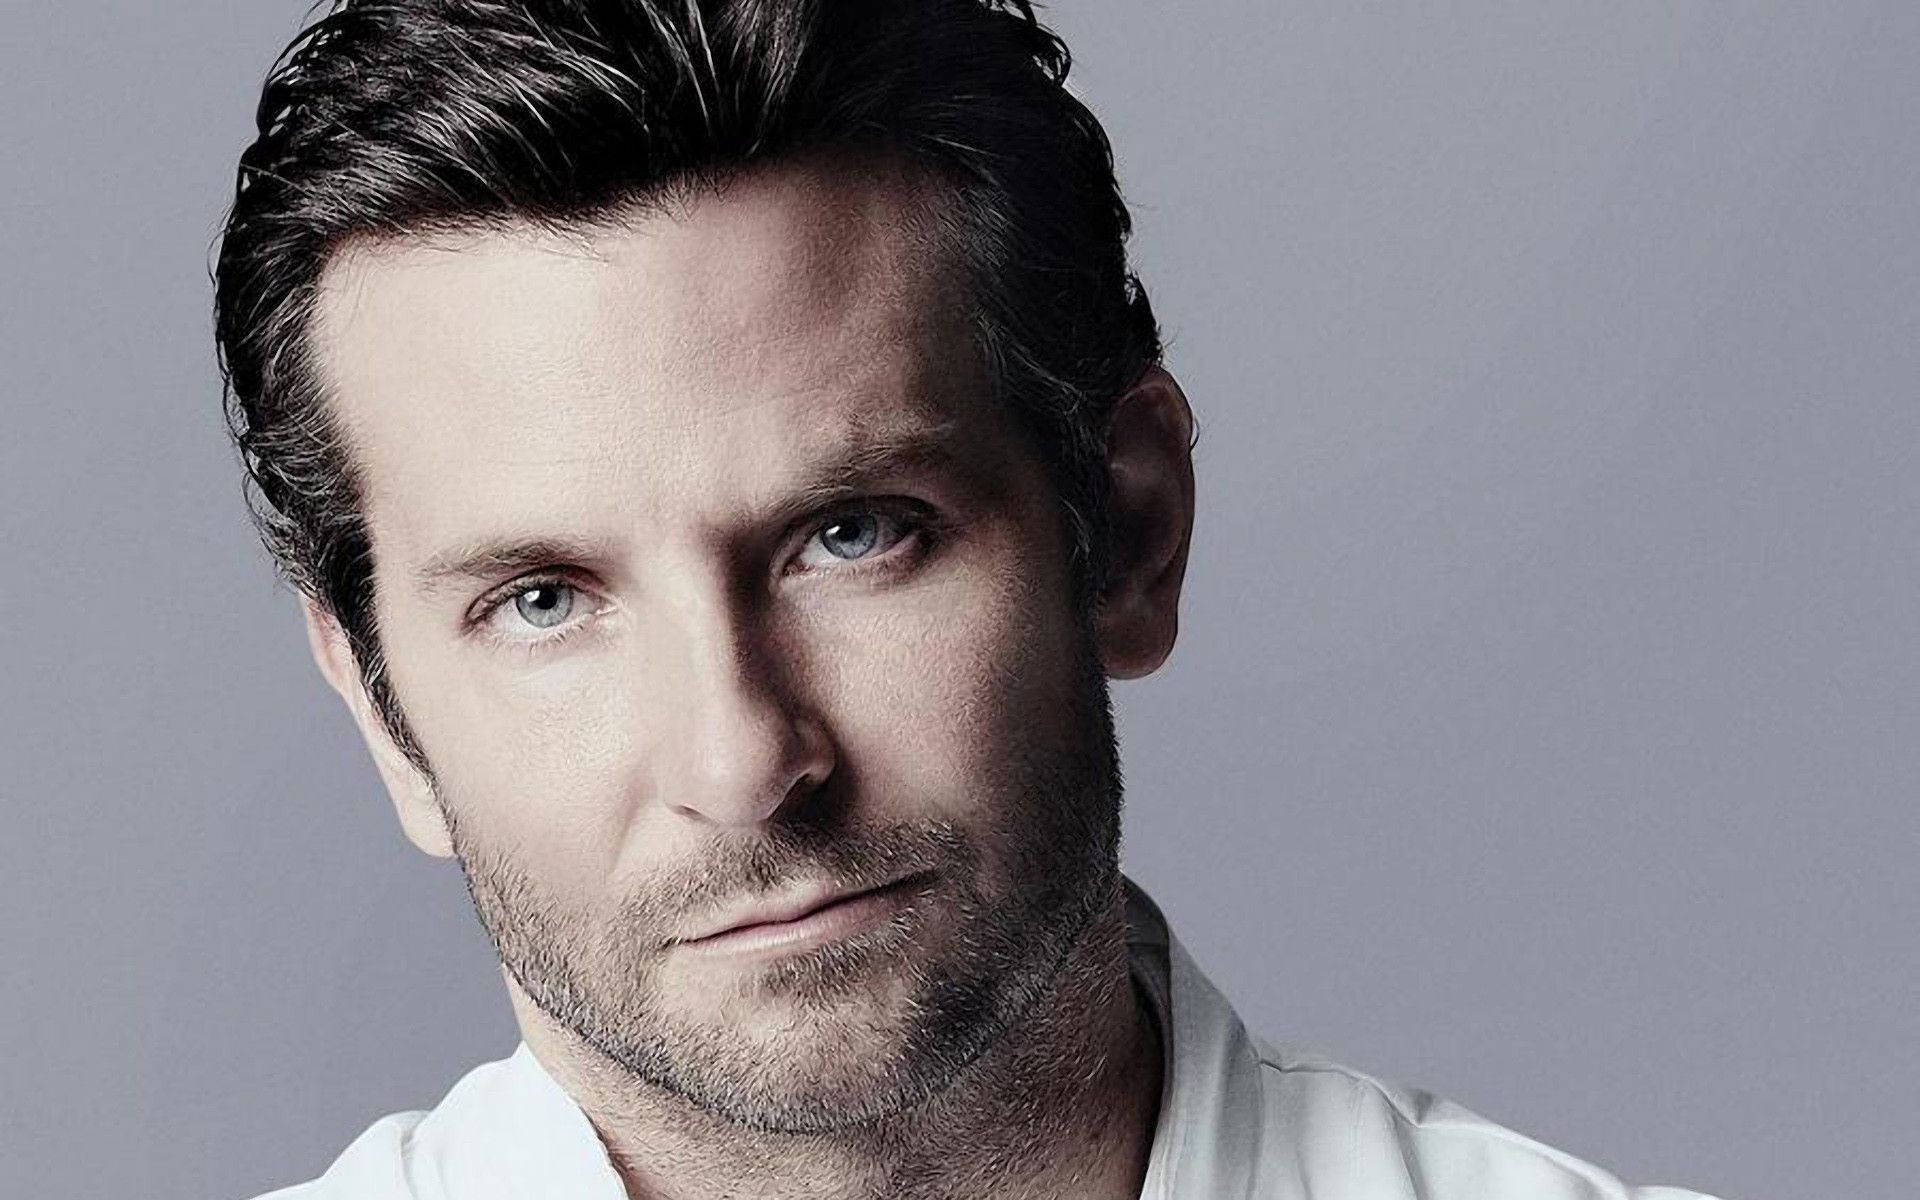 Bradley Cooper, Hollywood's Charming A-lister Background